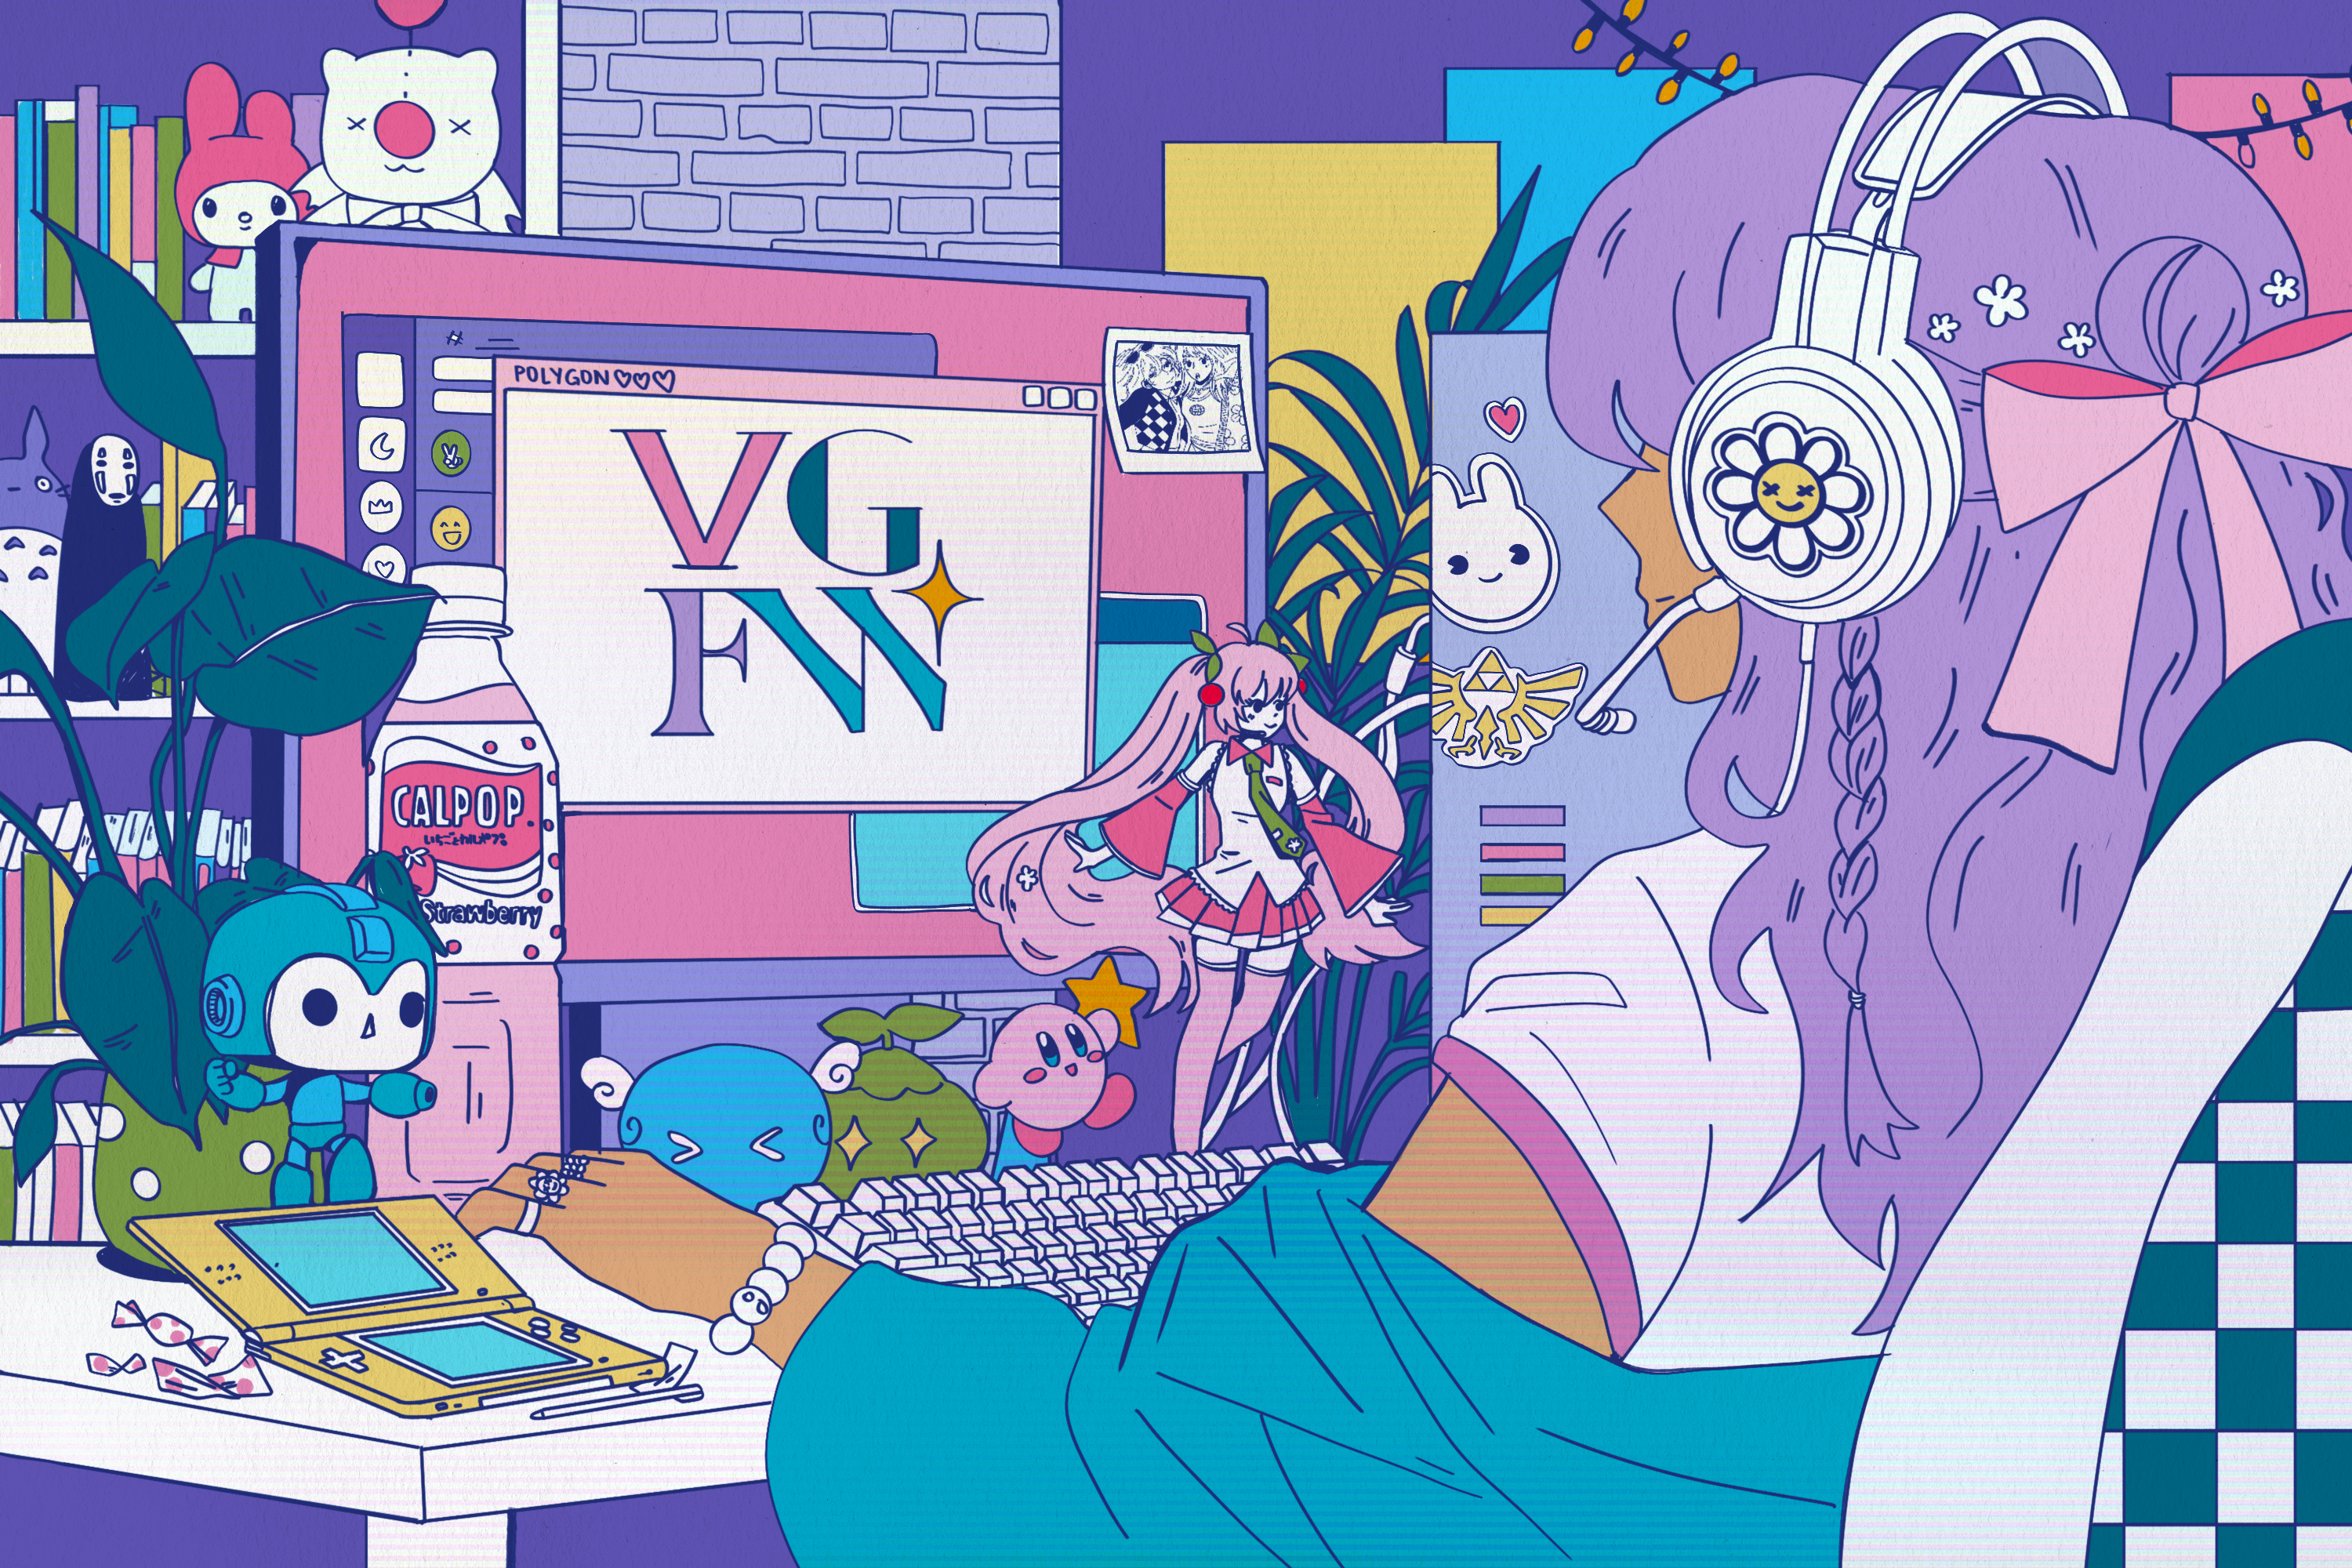 An illustration shows a woman sitting in front of a computer looking at a Video Game Fashion Week logo, while her desk is covered in cute toys.